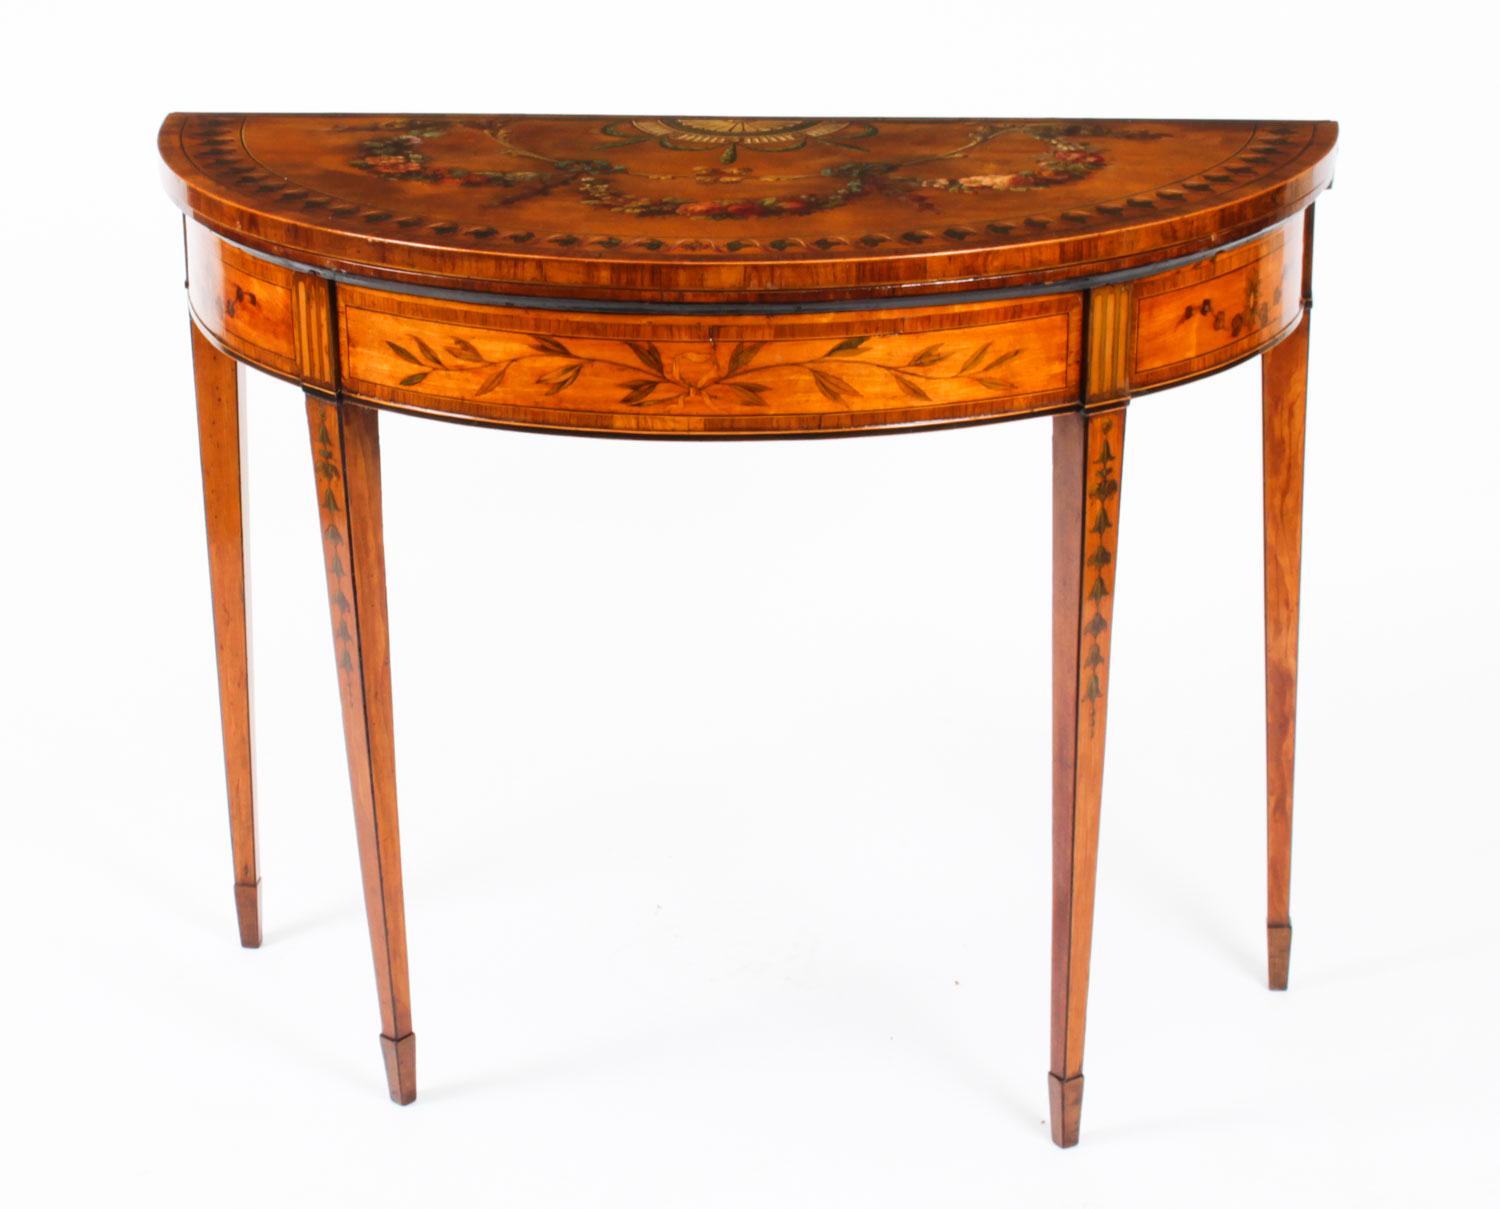 This is a beautiful antique hand painted Goerge III satinwood demi-lune card table, circa 1800 in date and decorated throughout with hand painted floral, foliate and ribbon-tied flowering swags in the manner of Angelica Kauffman.

The folding top